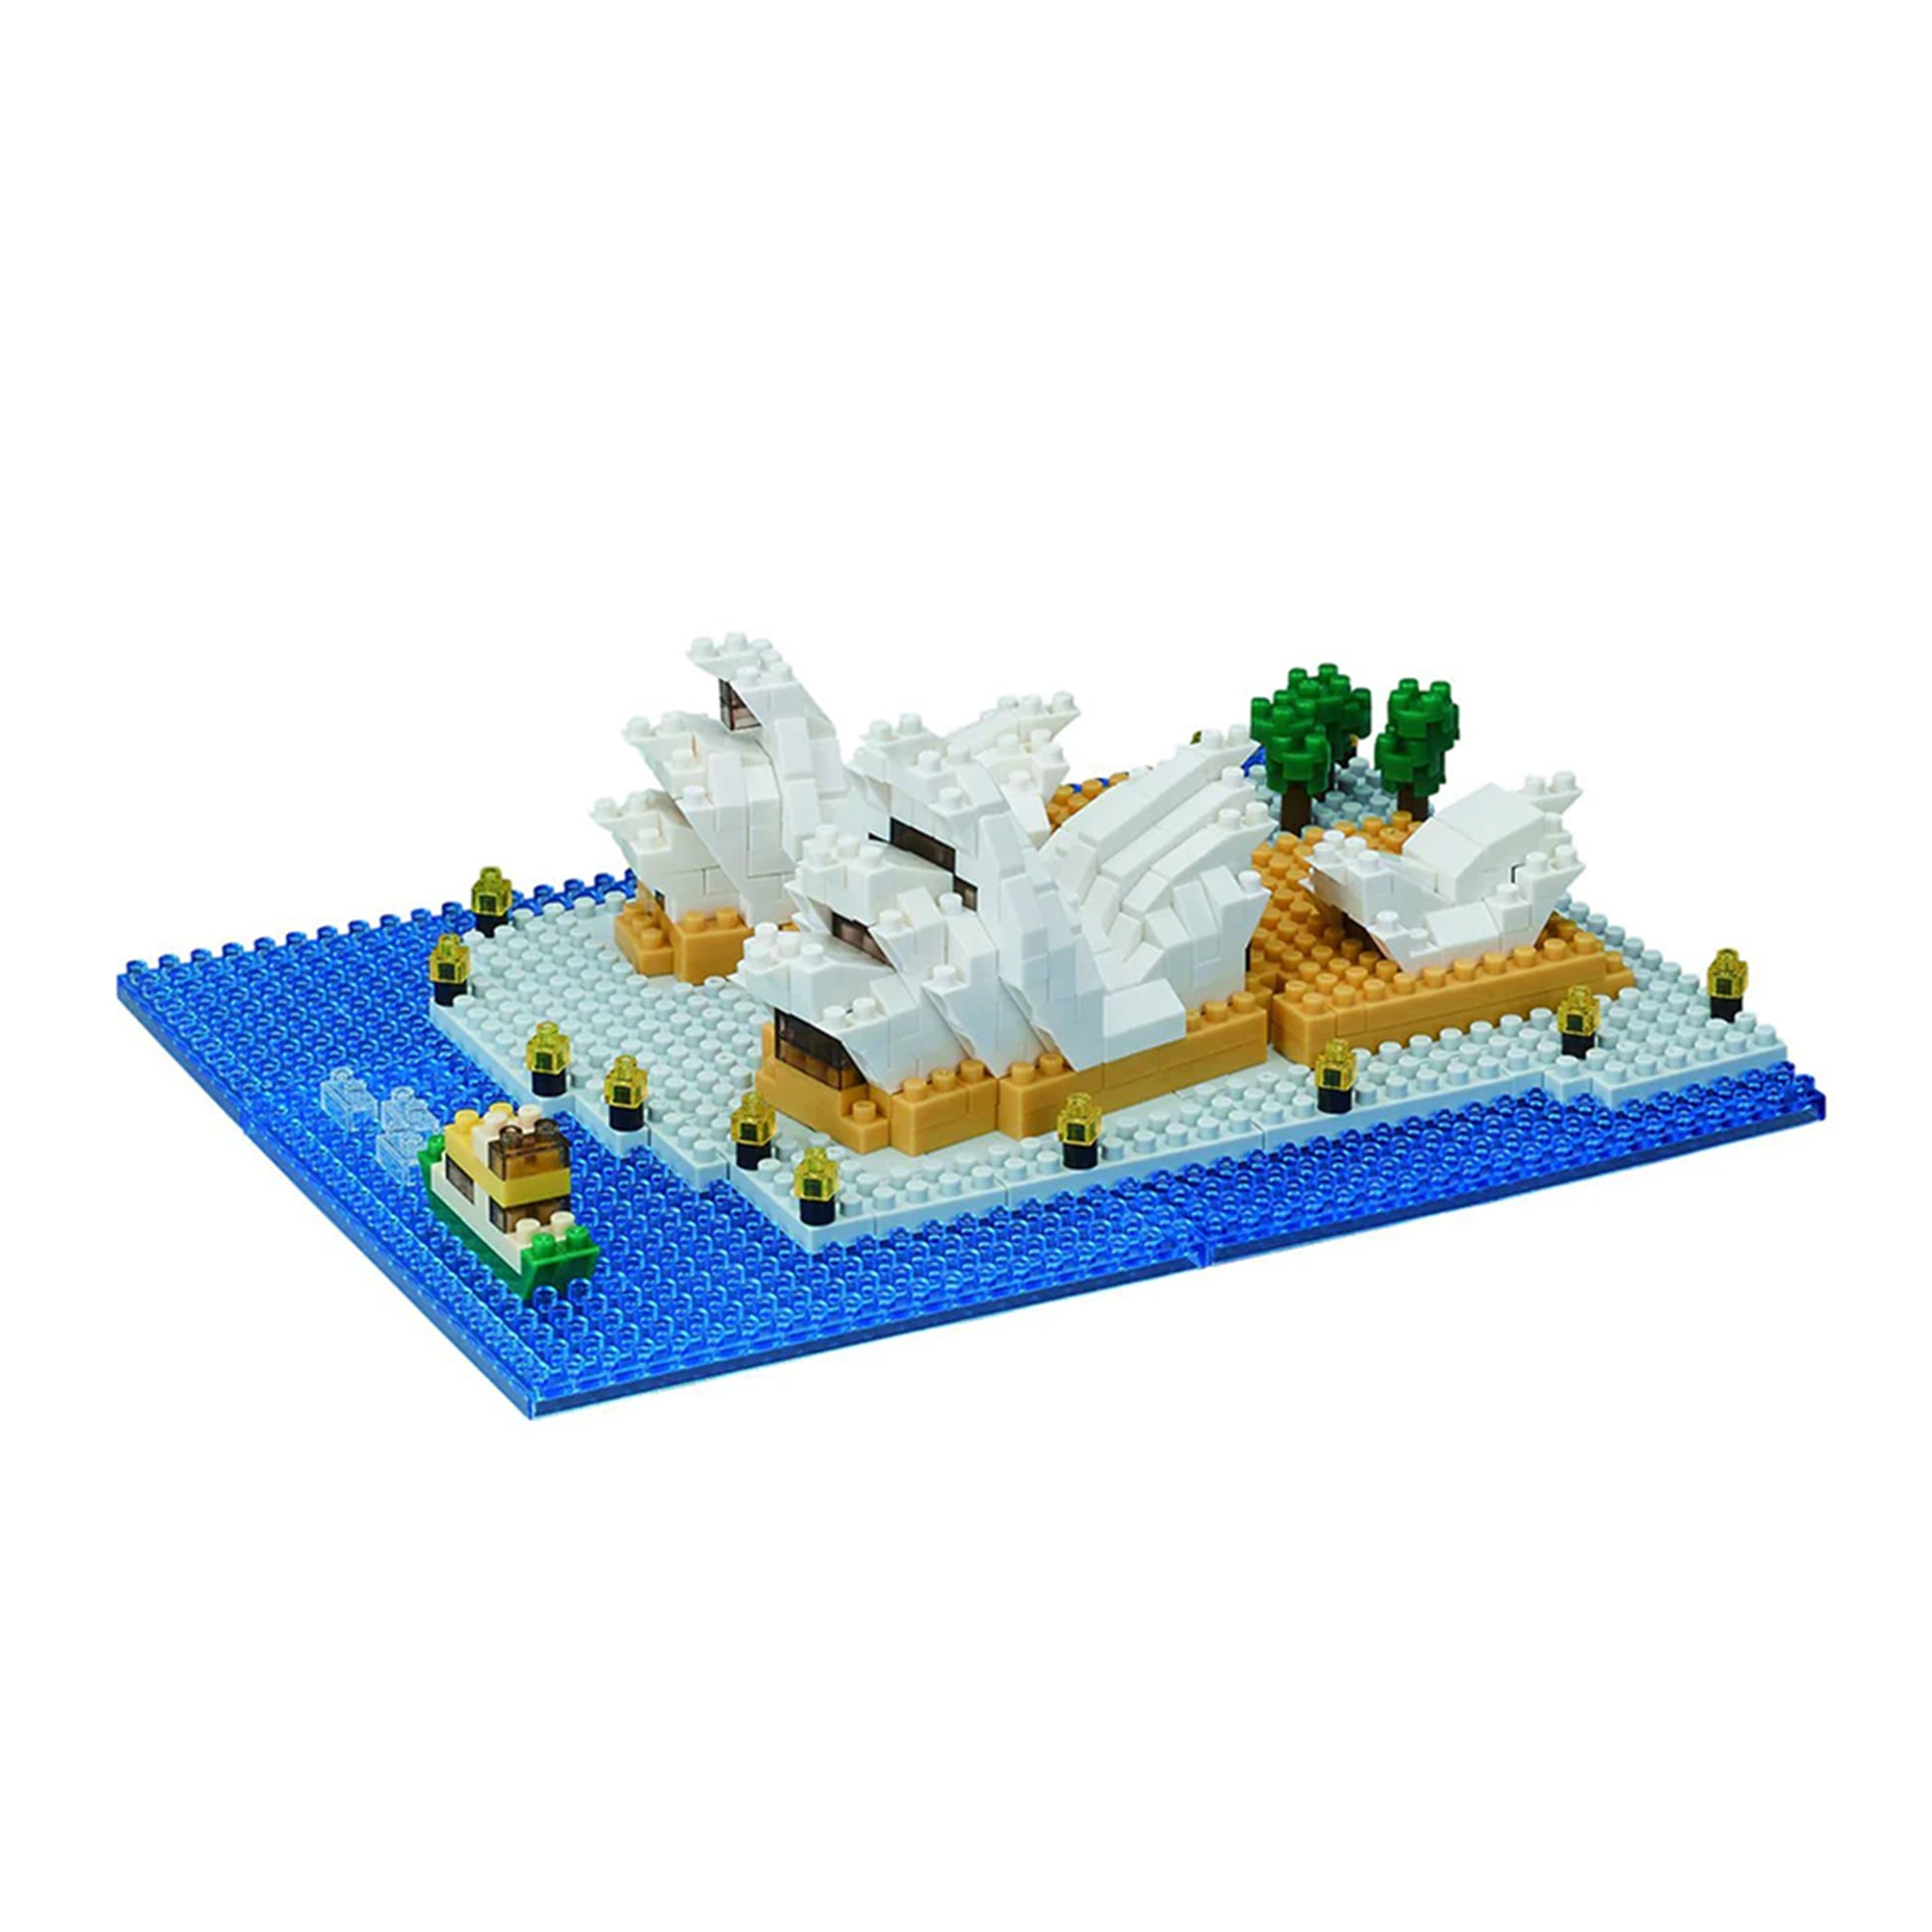 Nano block model of Sydney Opera House, showcasing its iconic architecture and intricate details.